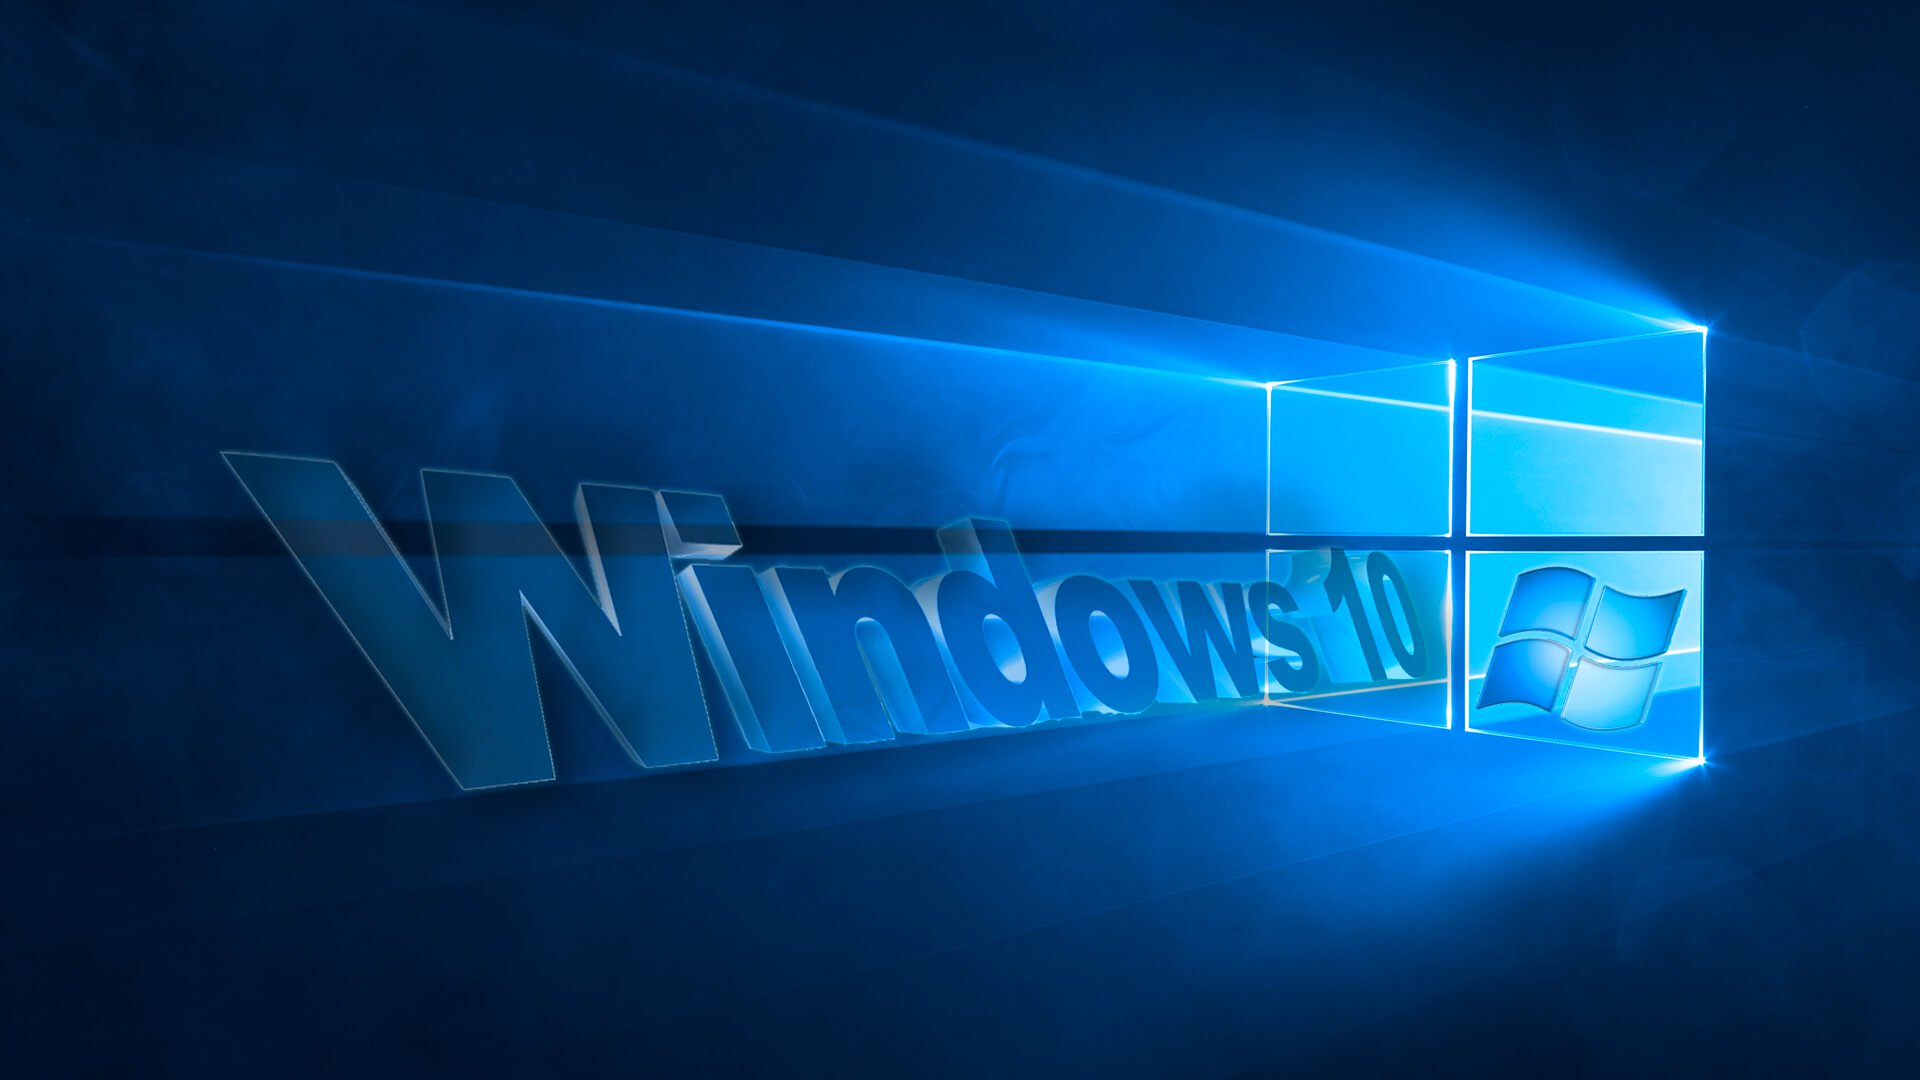 Windows 10 can now be updated on each computer